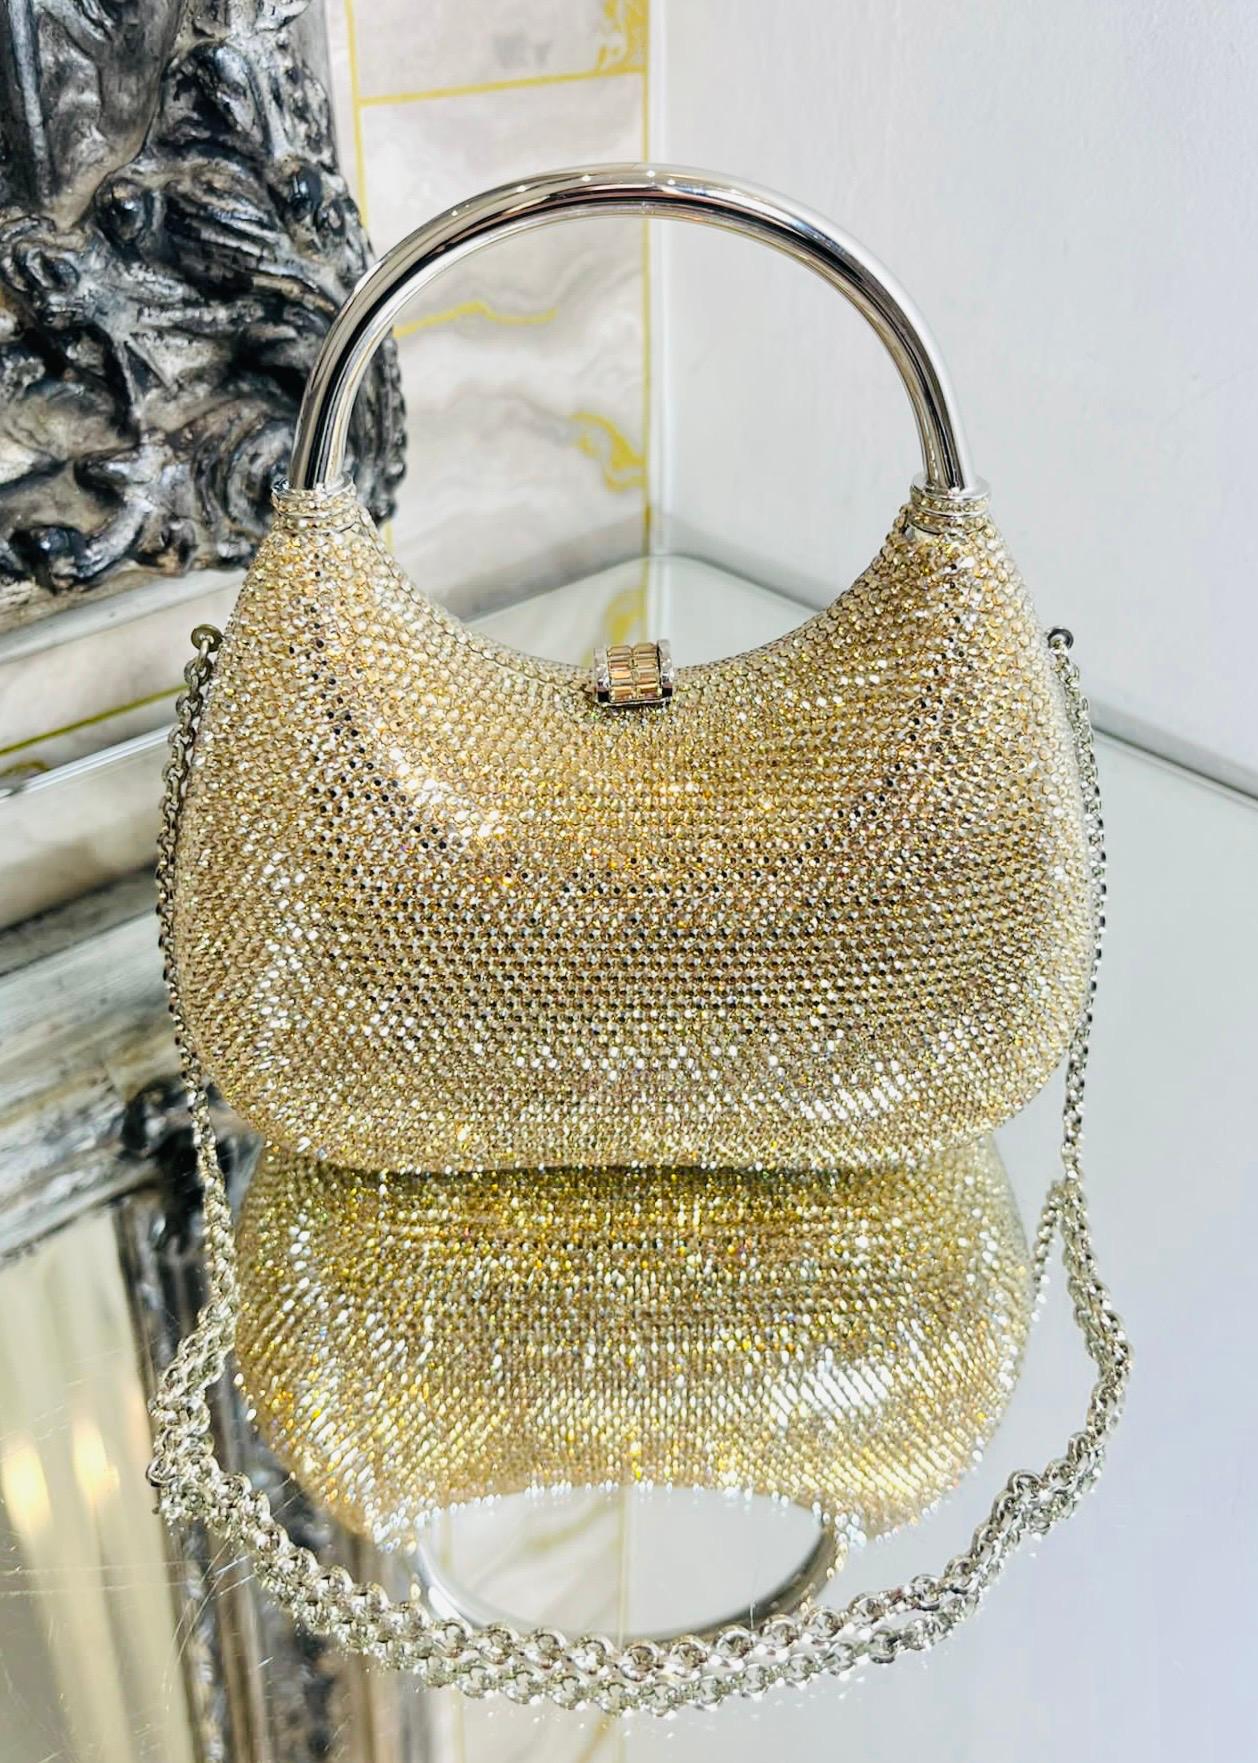 Judith Leiber Crystal Embellished Evening Bag

Gold, hobo-shaped clutch bag adorned with crystals throughout and silver metal top handle.

Featuring gold chain shoulder strap and push down closure leading to metallic silver leather interior. Rrp